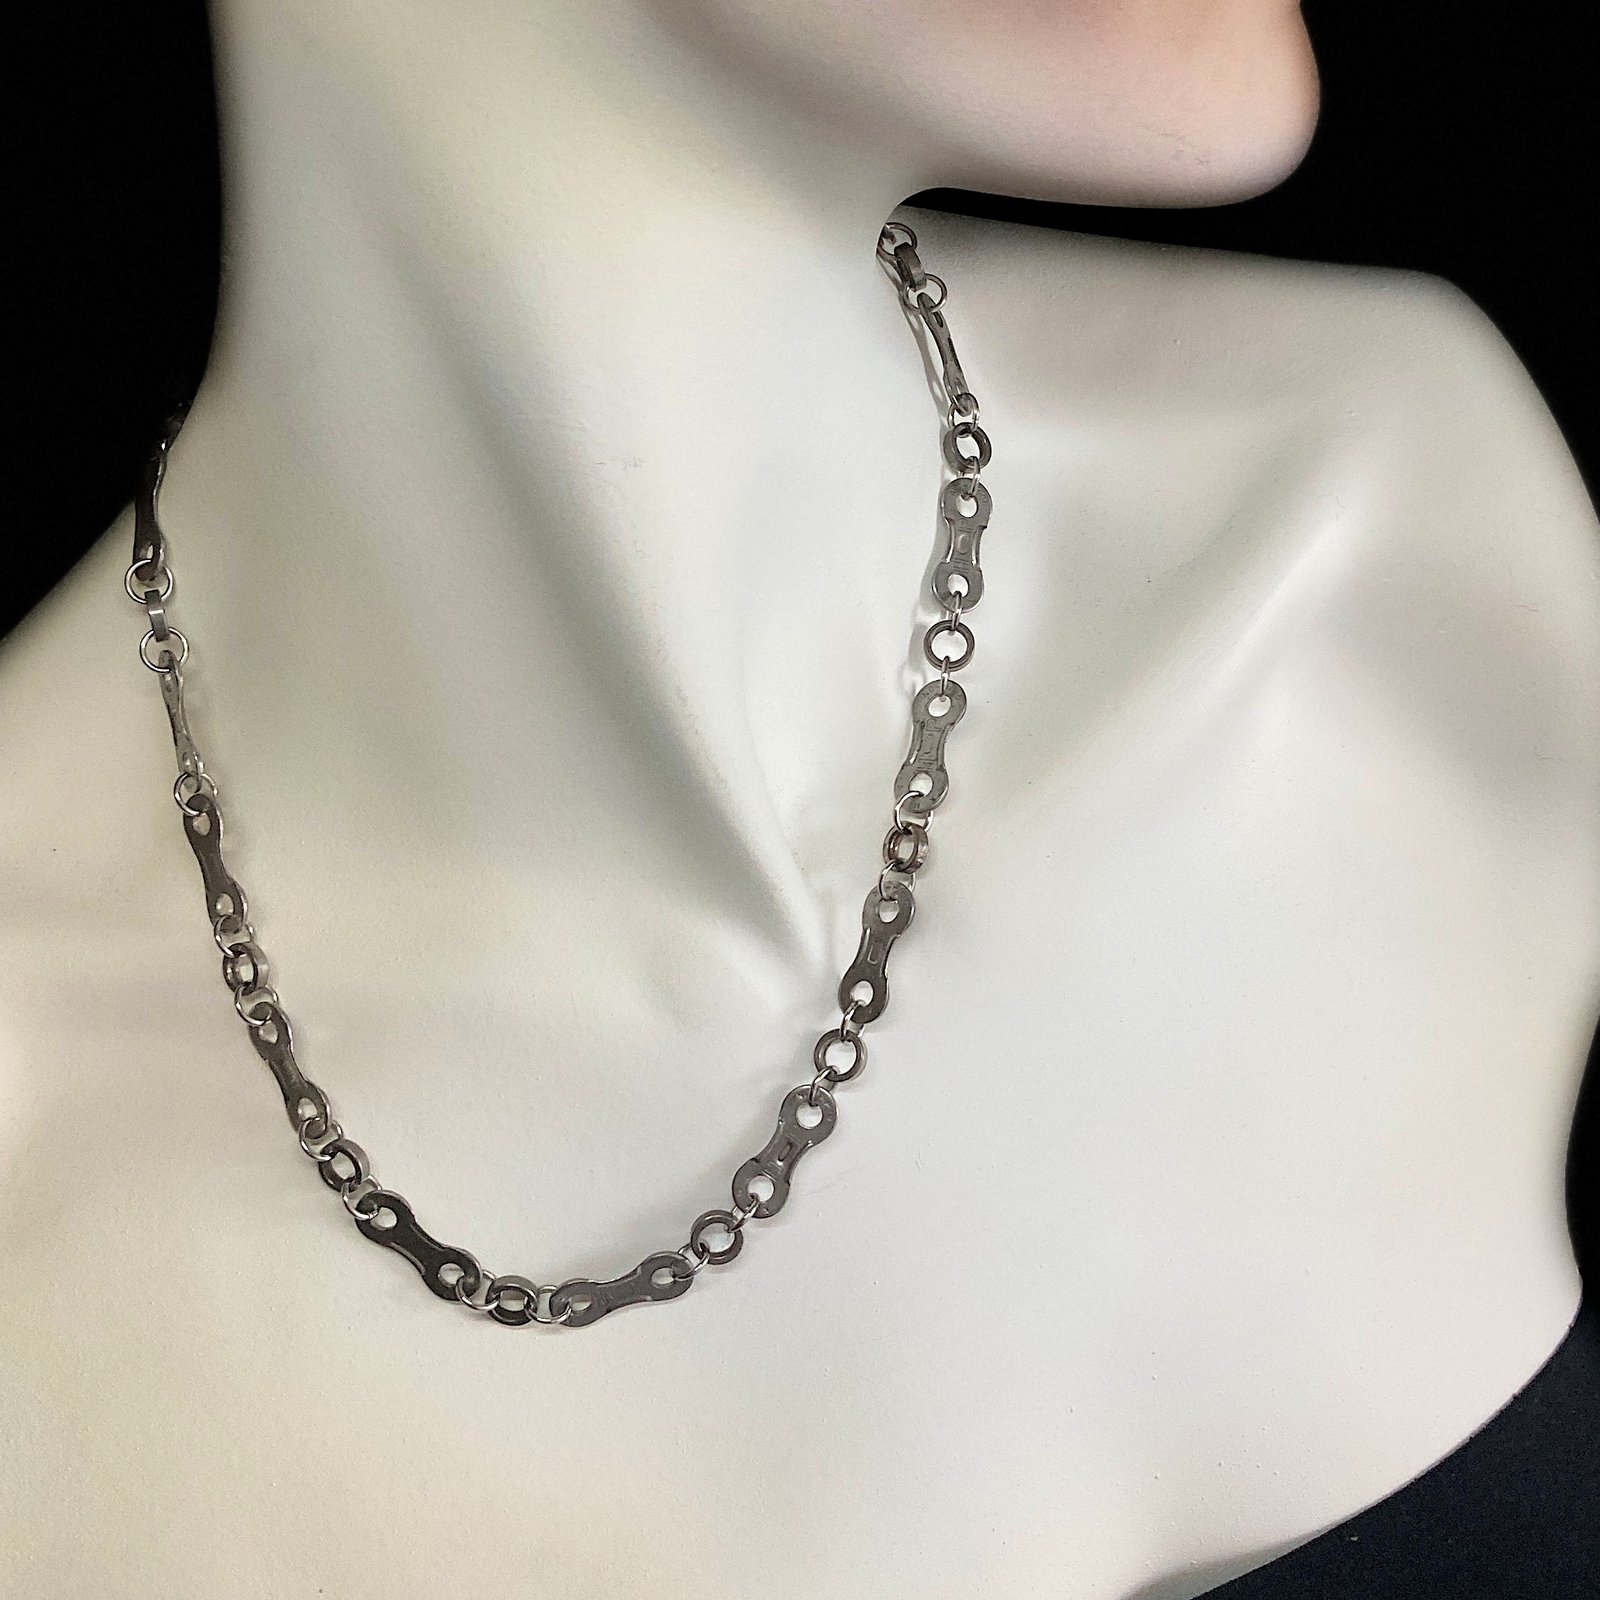 Project Cece | Diamond Recycled Bike Chain Pendant Necklace